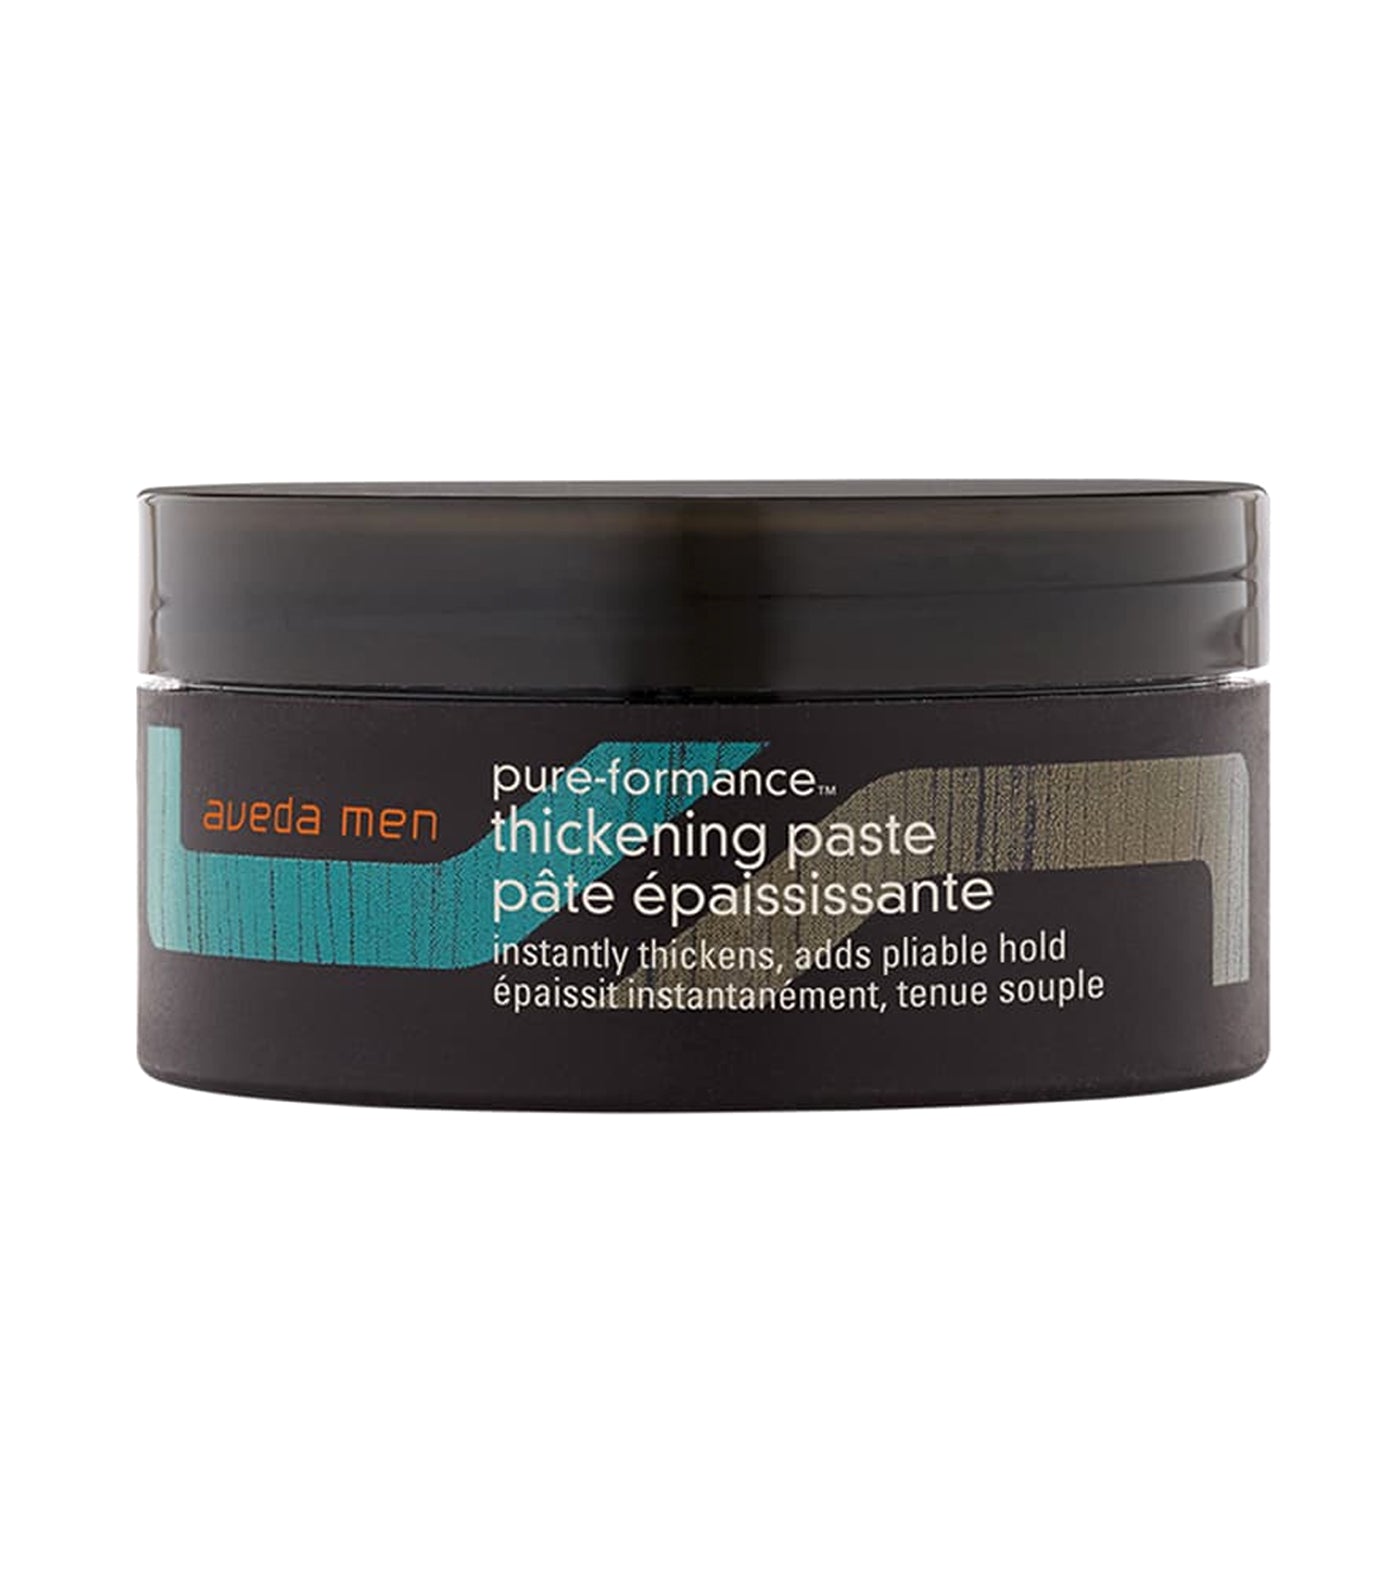 Aveda for aveda men pure-formance Thickening Paste